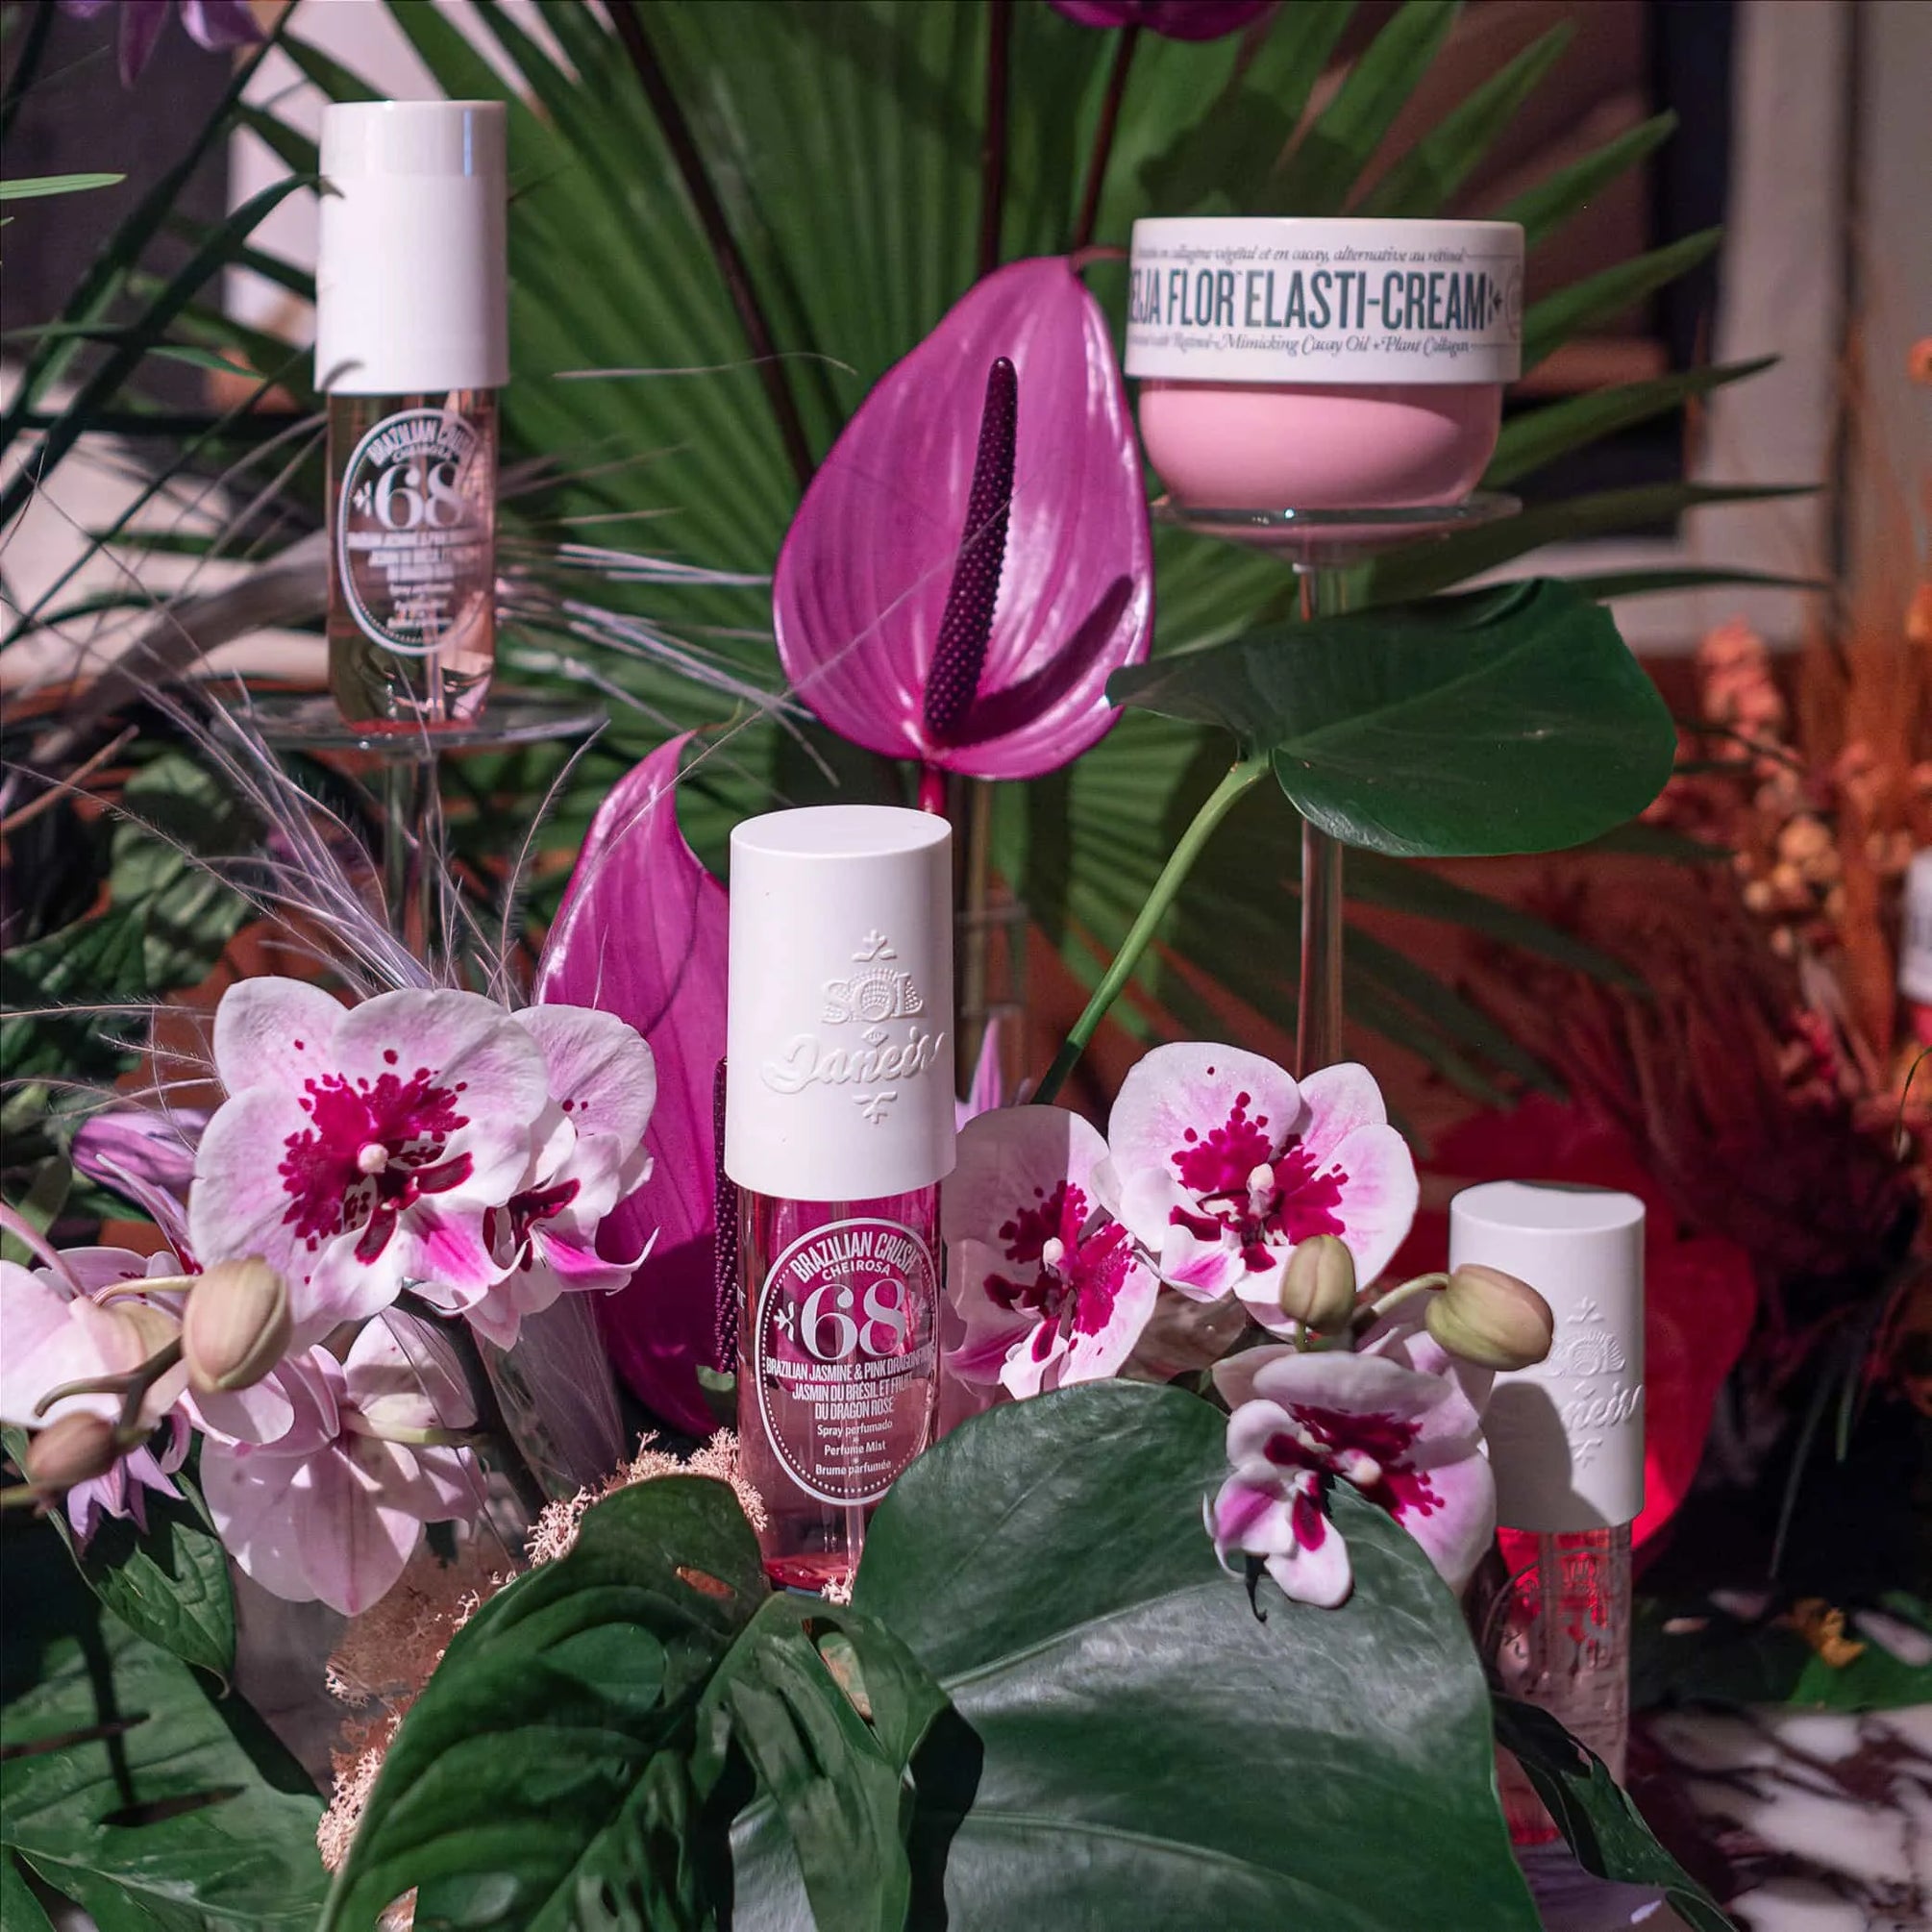 Elegant floral display by Amaranté London featuring Sol de Janeiro skincare products, including the pink Beija Flor Elasti-Cream, surrounded by orchids and tropical foliage.